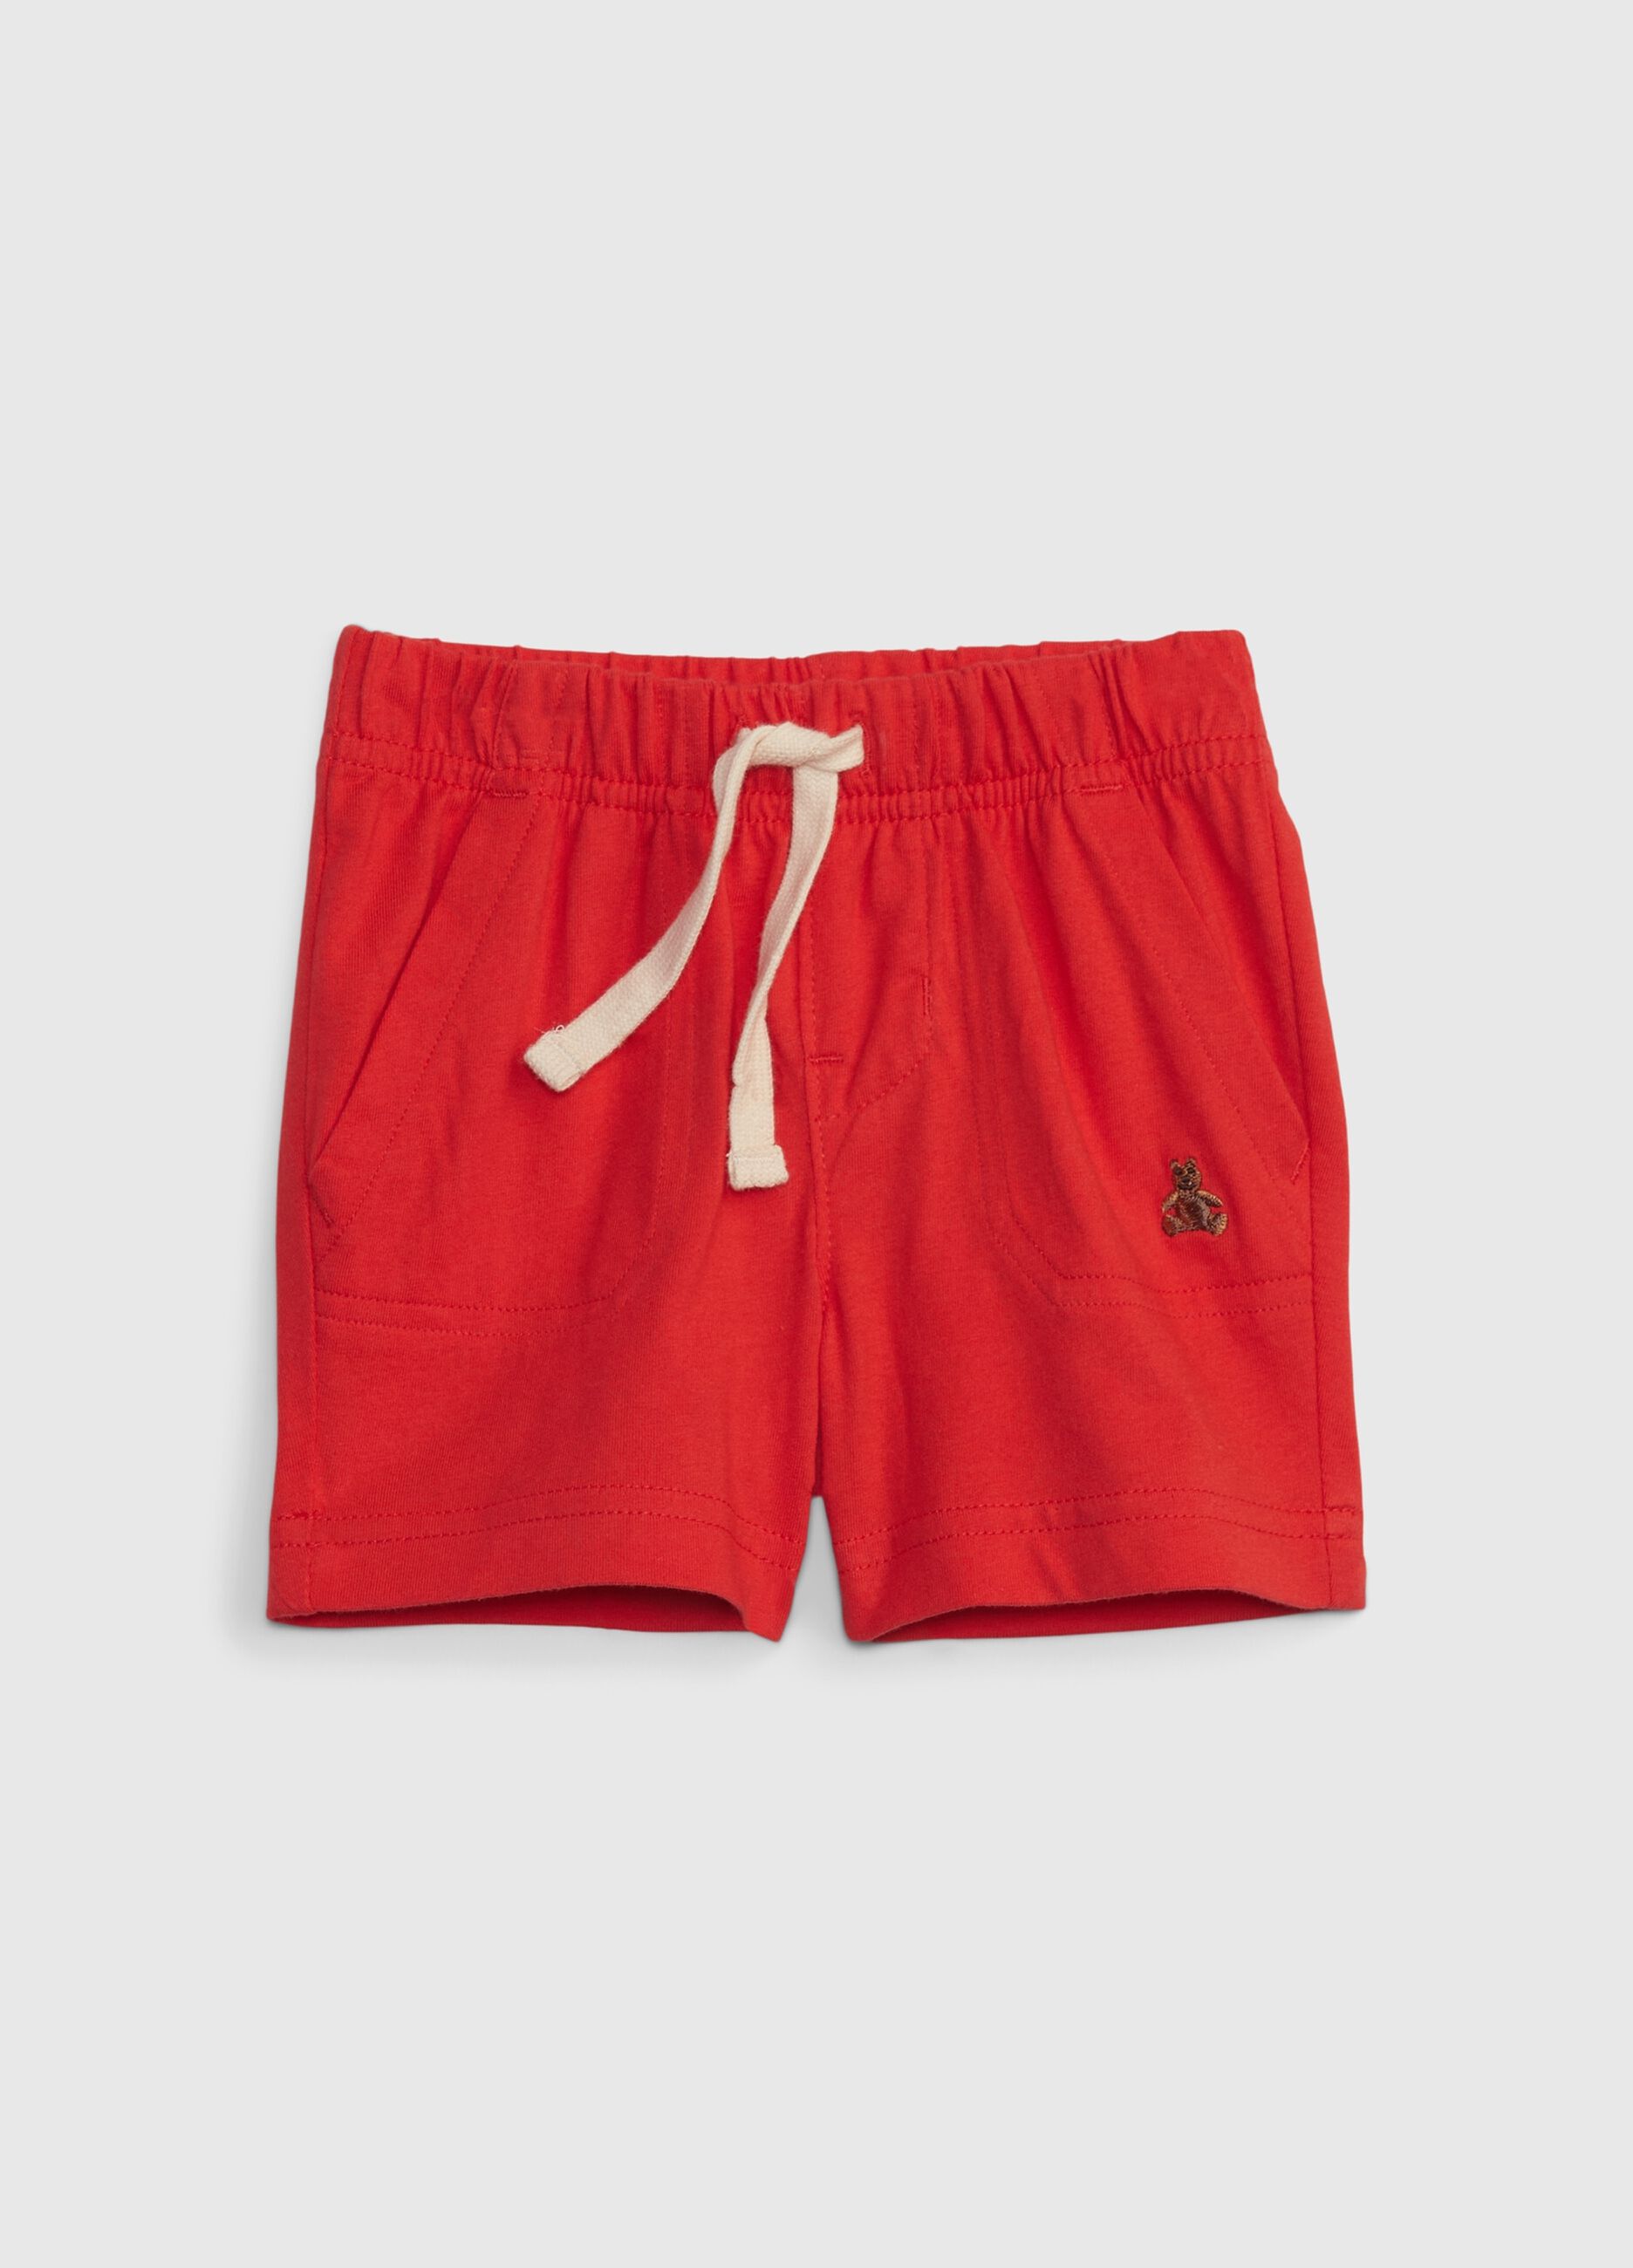 Organic cotton shorts with teddy bear embroidery